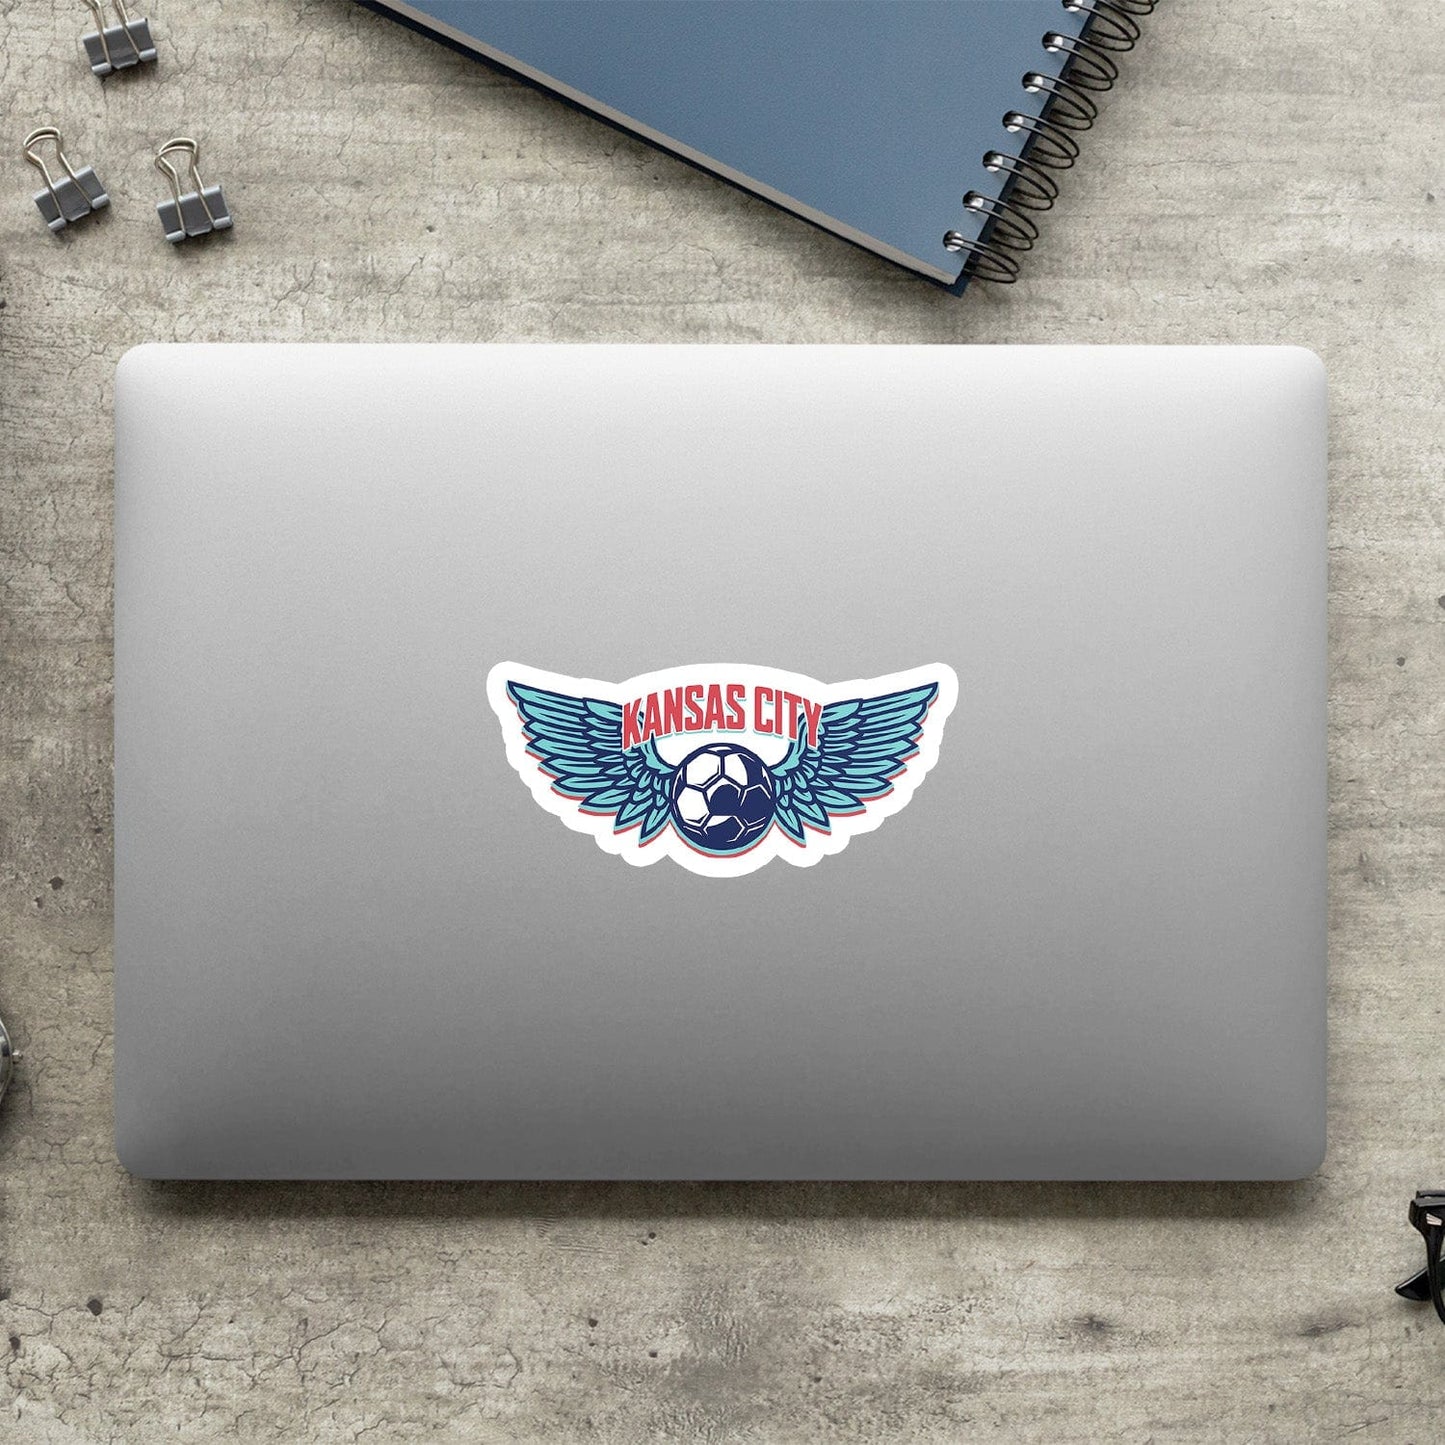 KC Swag Kansas City Current KC WING BALL die-cut sticker decal made from waterproof vinyl on closed laptop back